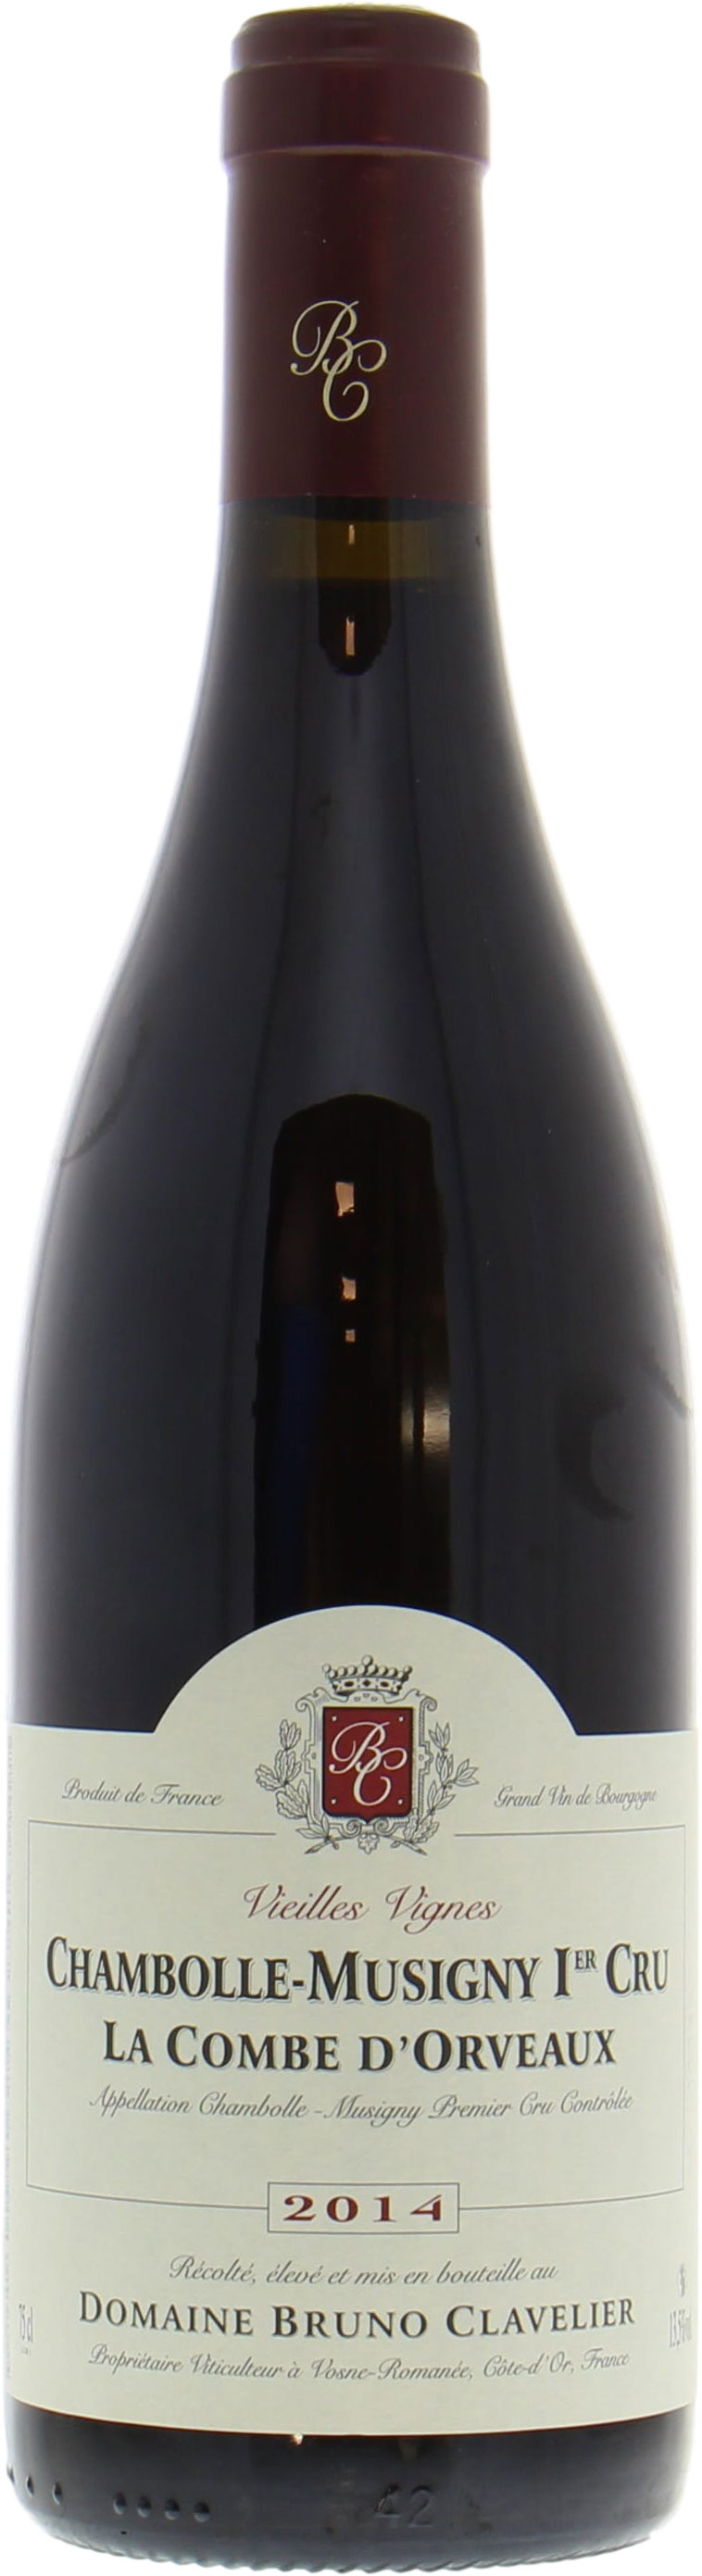 Bruno Clavelier - Chambolle Musigny La Combe D'Orveaux VV 2014 Perfect